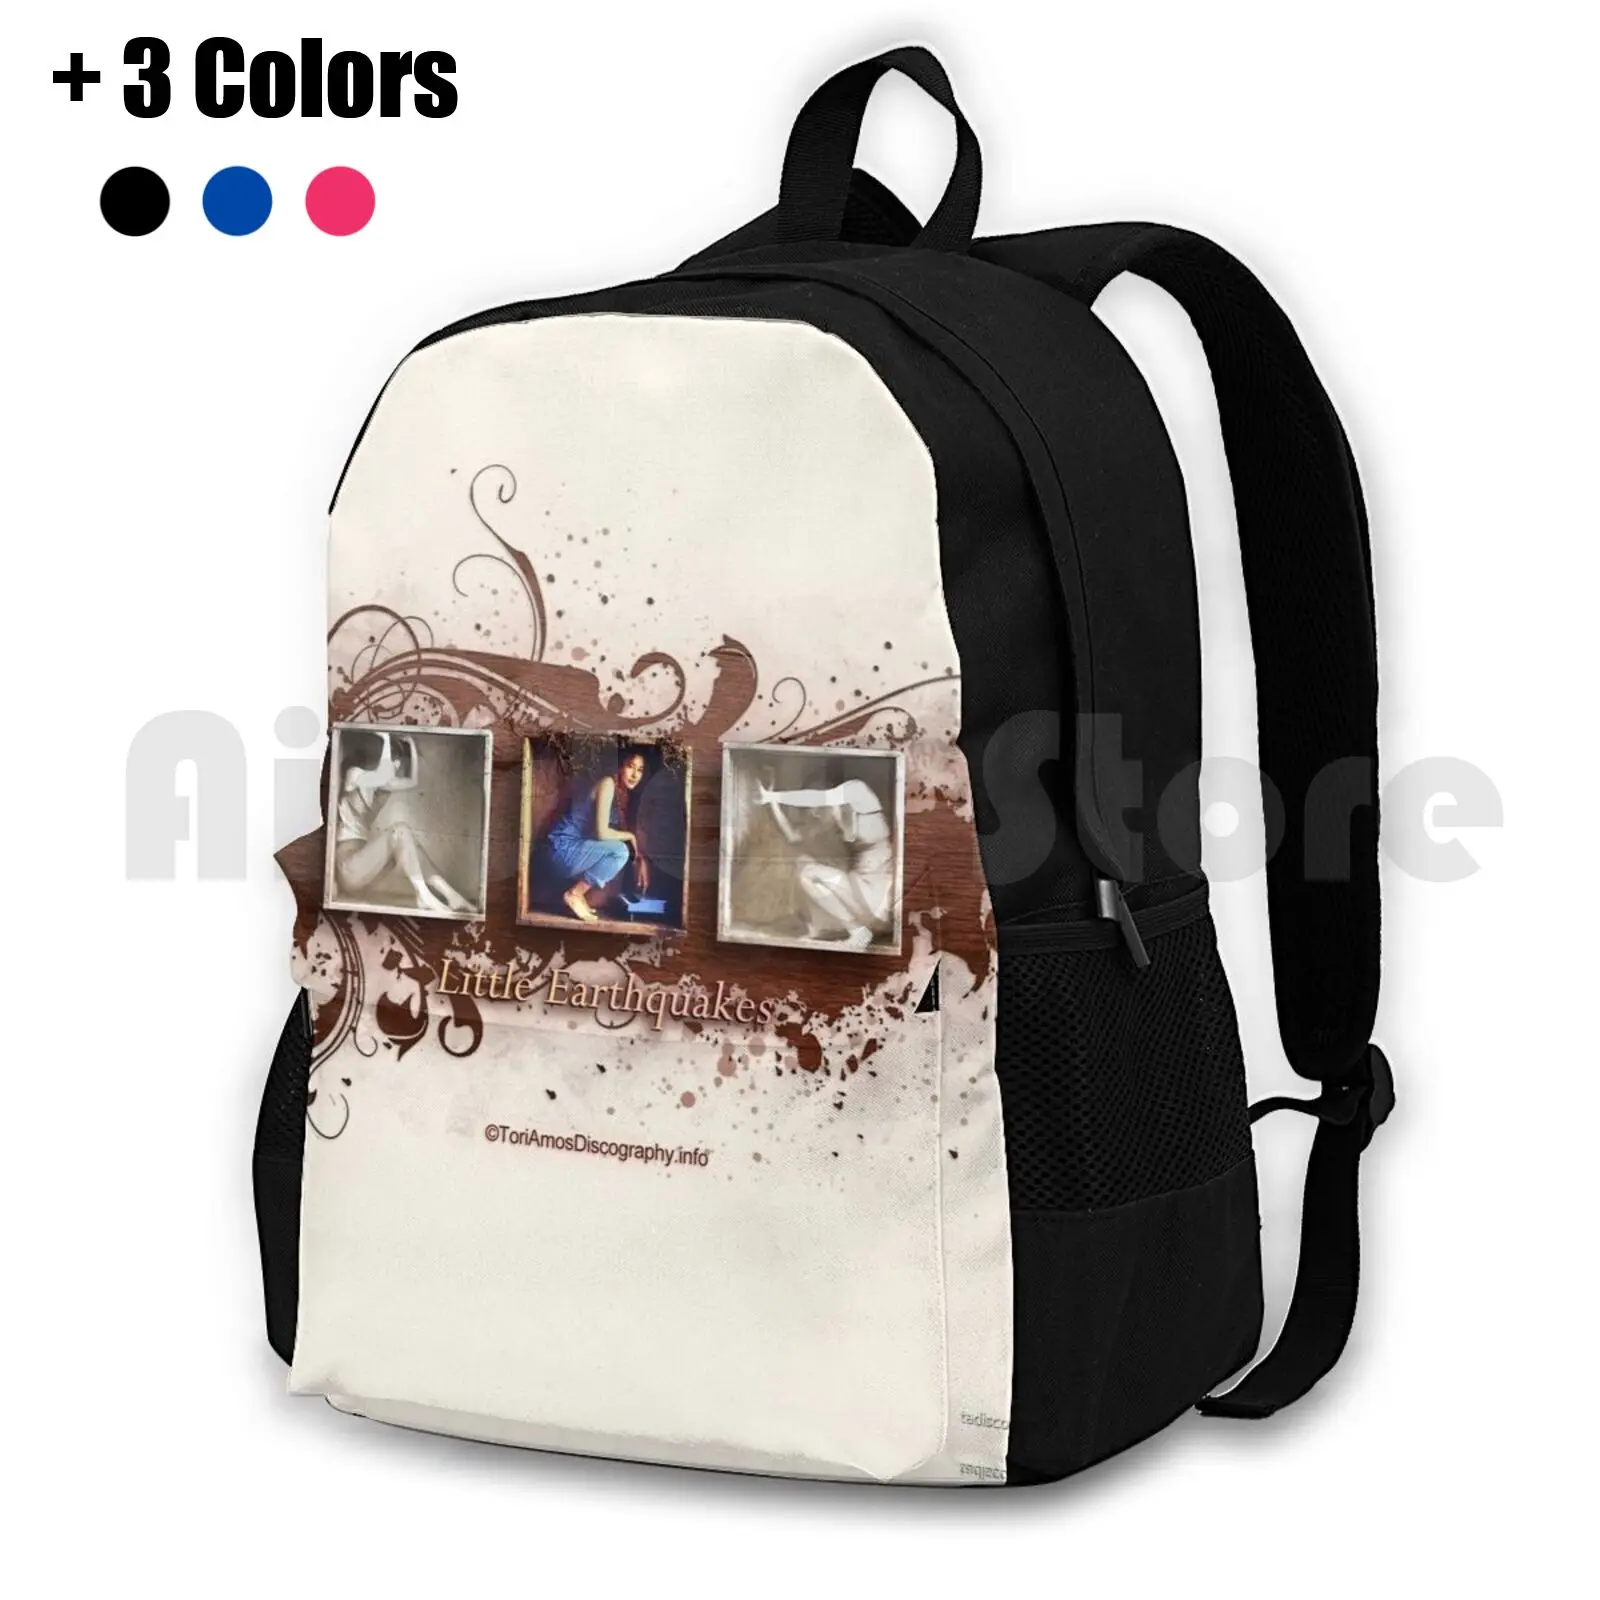 

Little Earthquakes Design From Toriamosdiscography.Info Outdoor Hiking Backpack Waterproof Camping Travel Tori Amos Discography